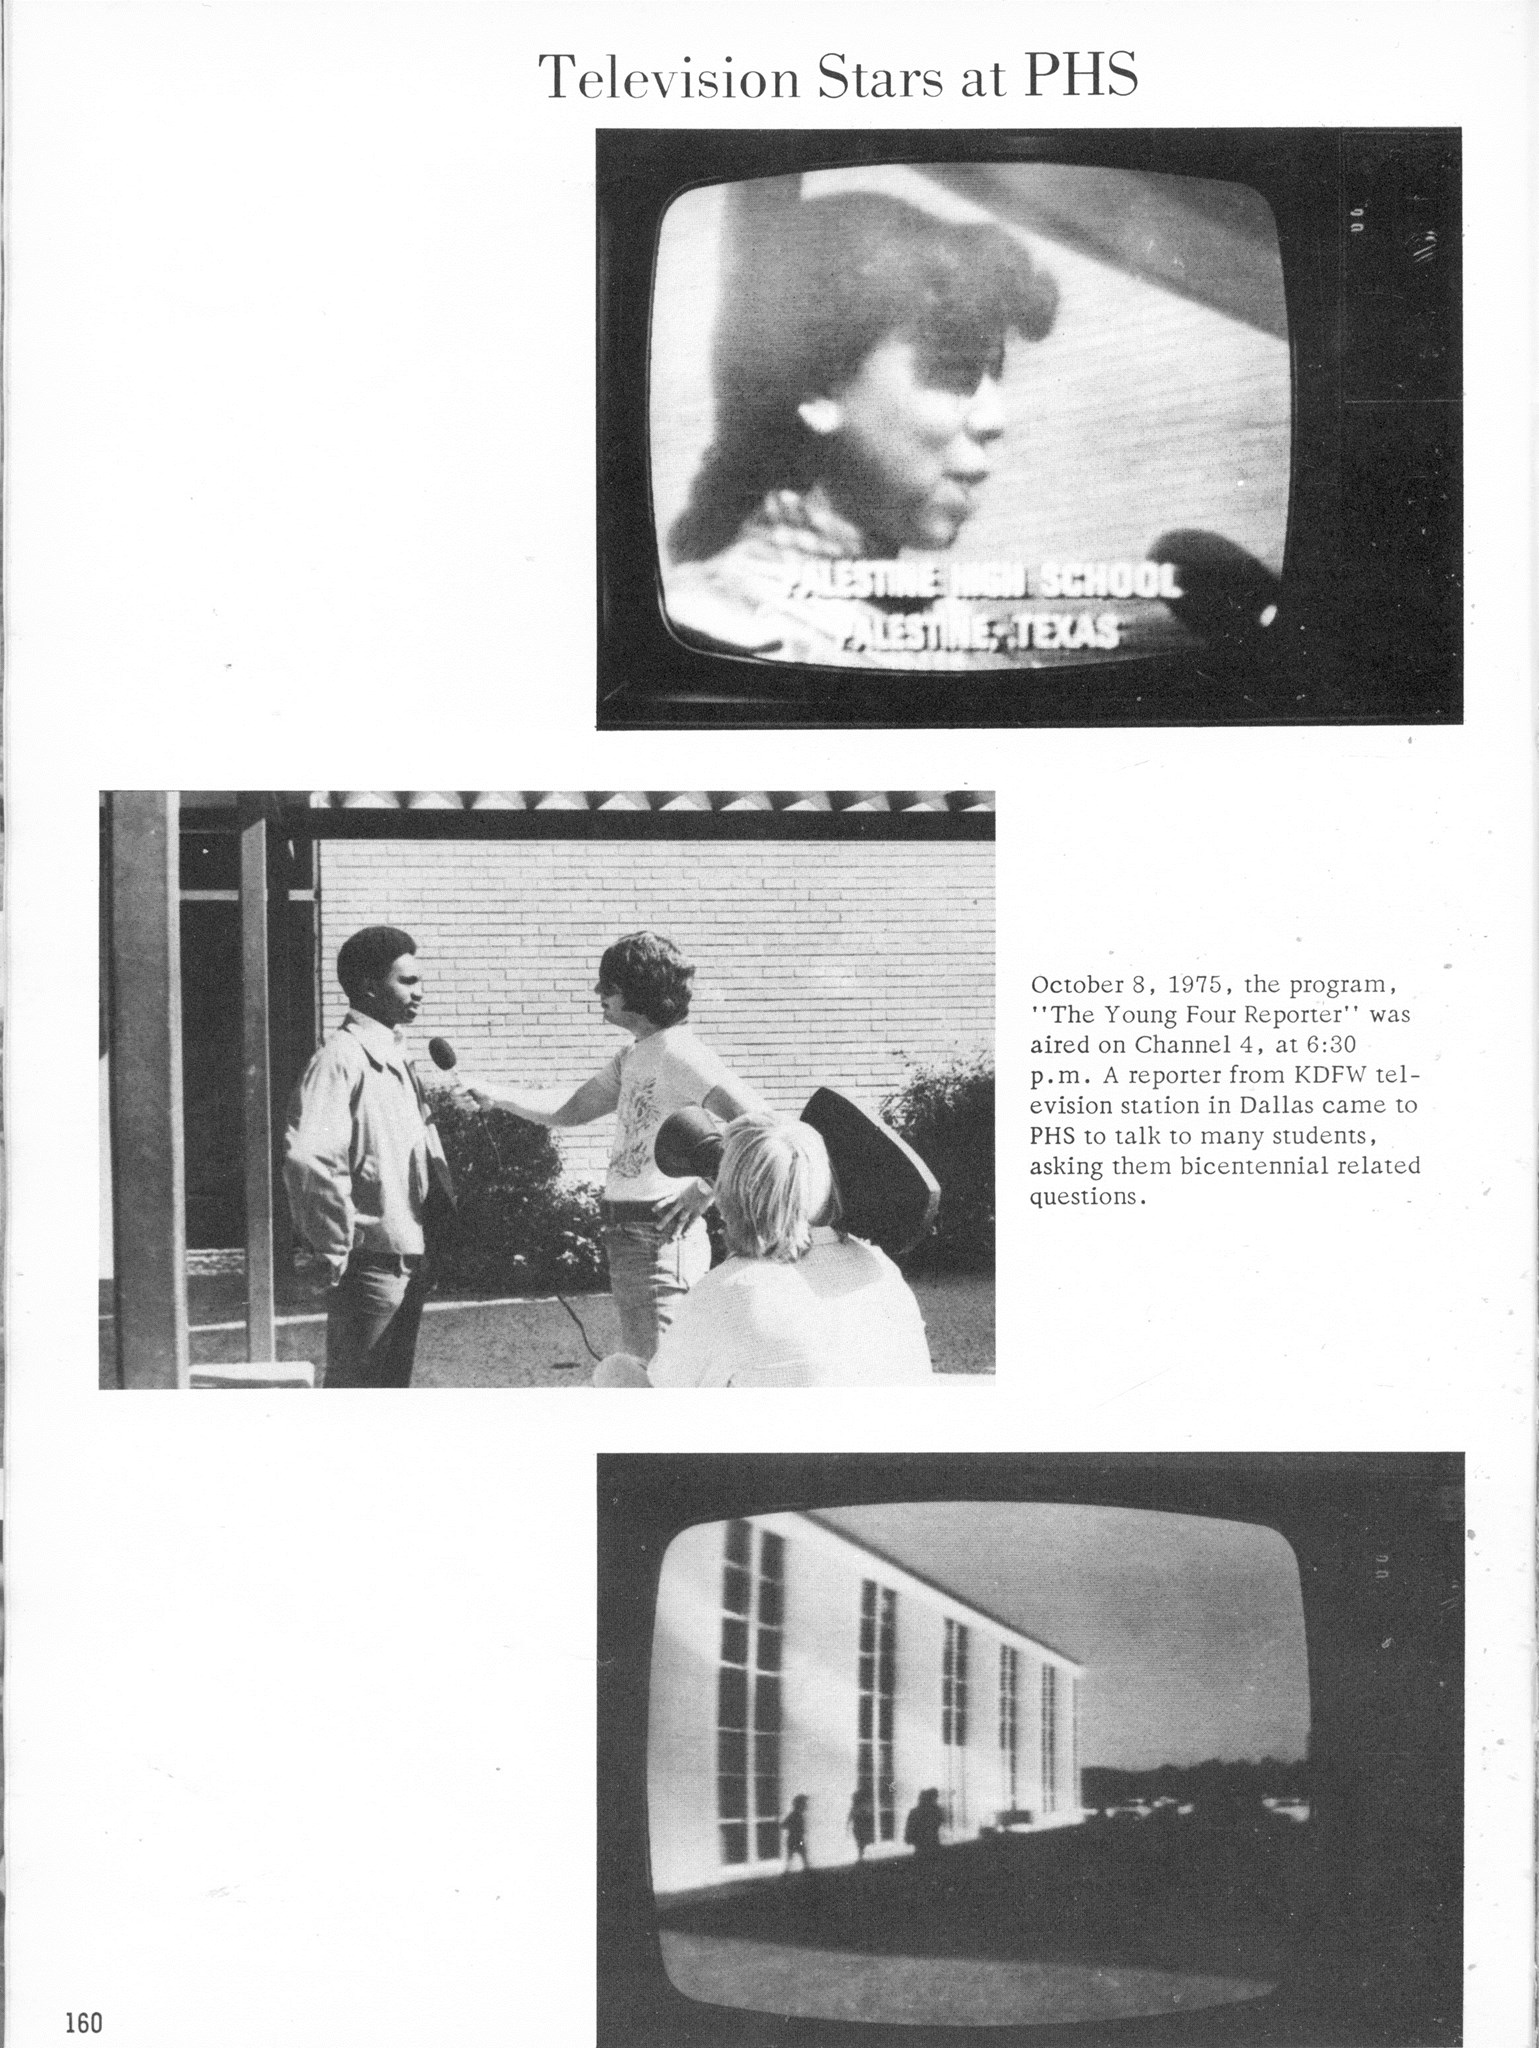 ../../../Images/Large/1976/Arclight-1976-pg0160.jpg